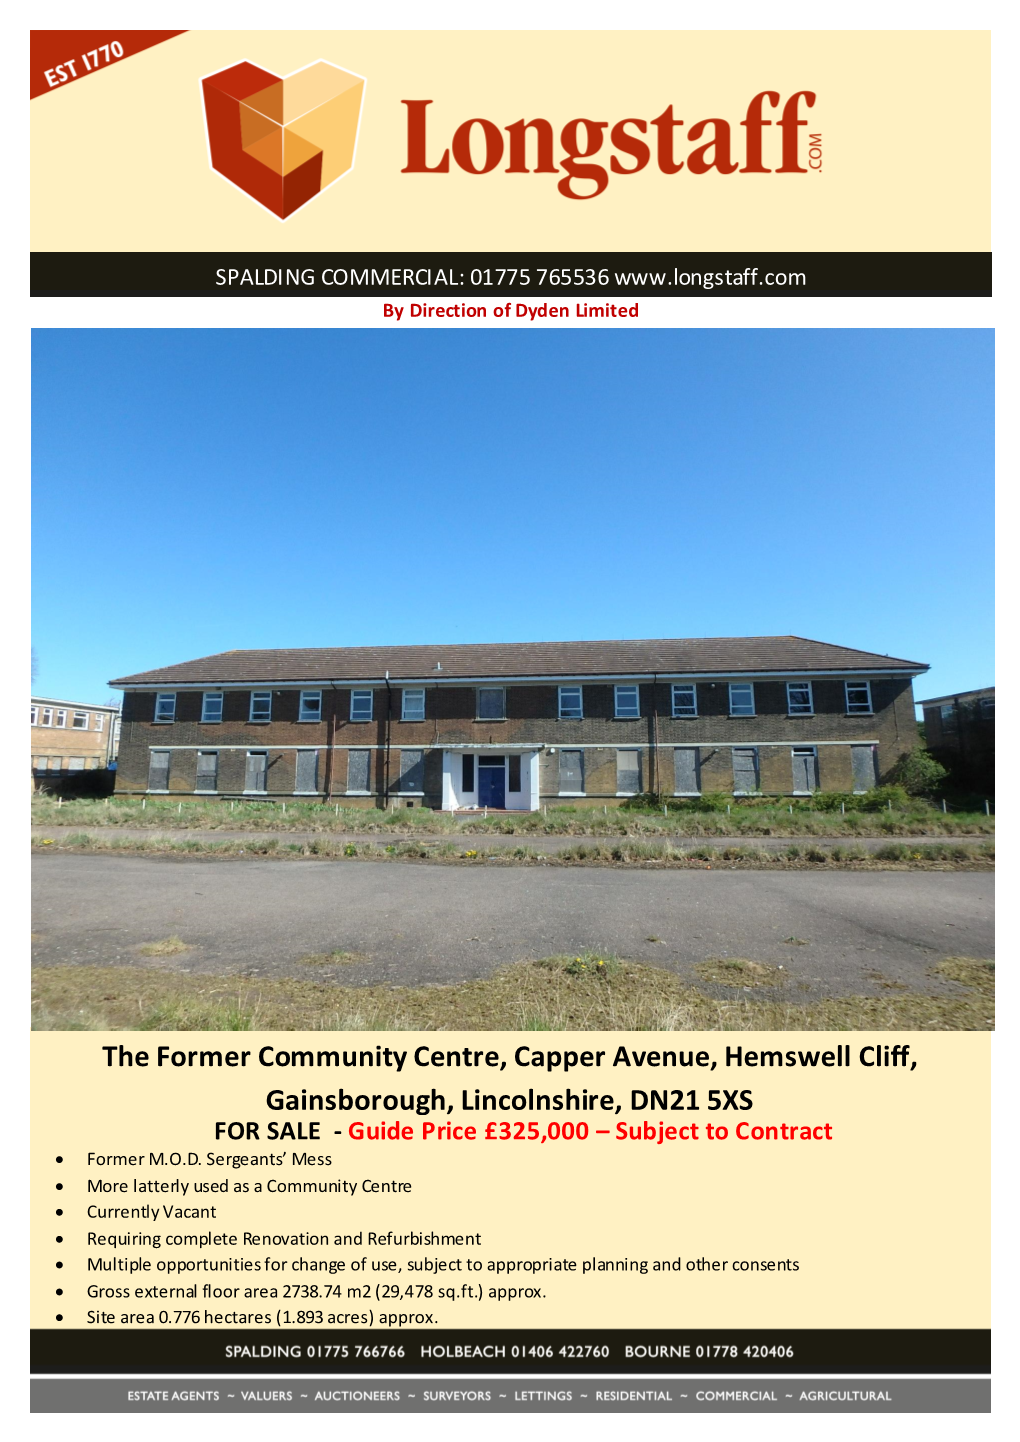 The Former Community Centre, Capper Avenue, Hemswell Cliff